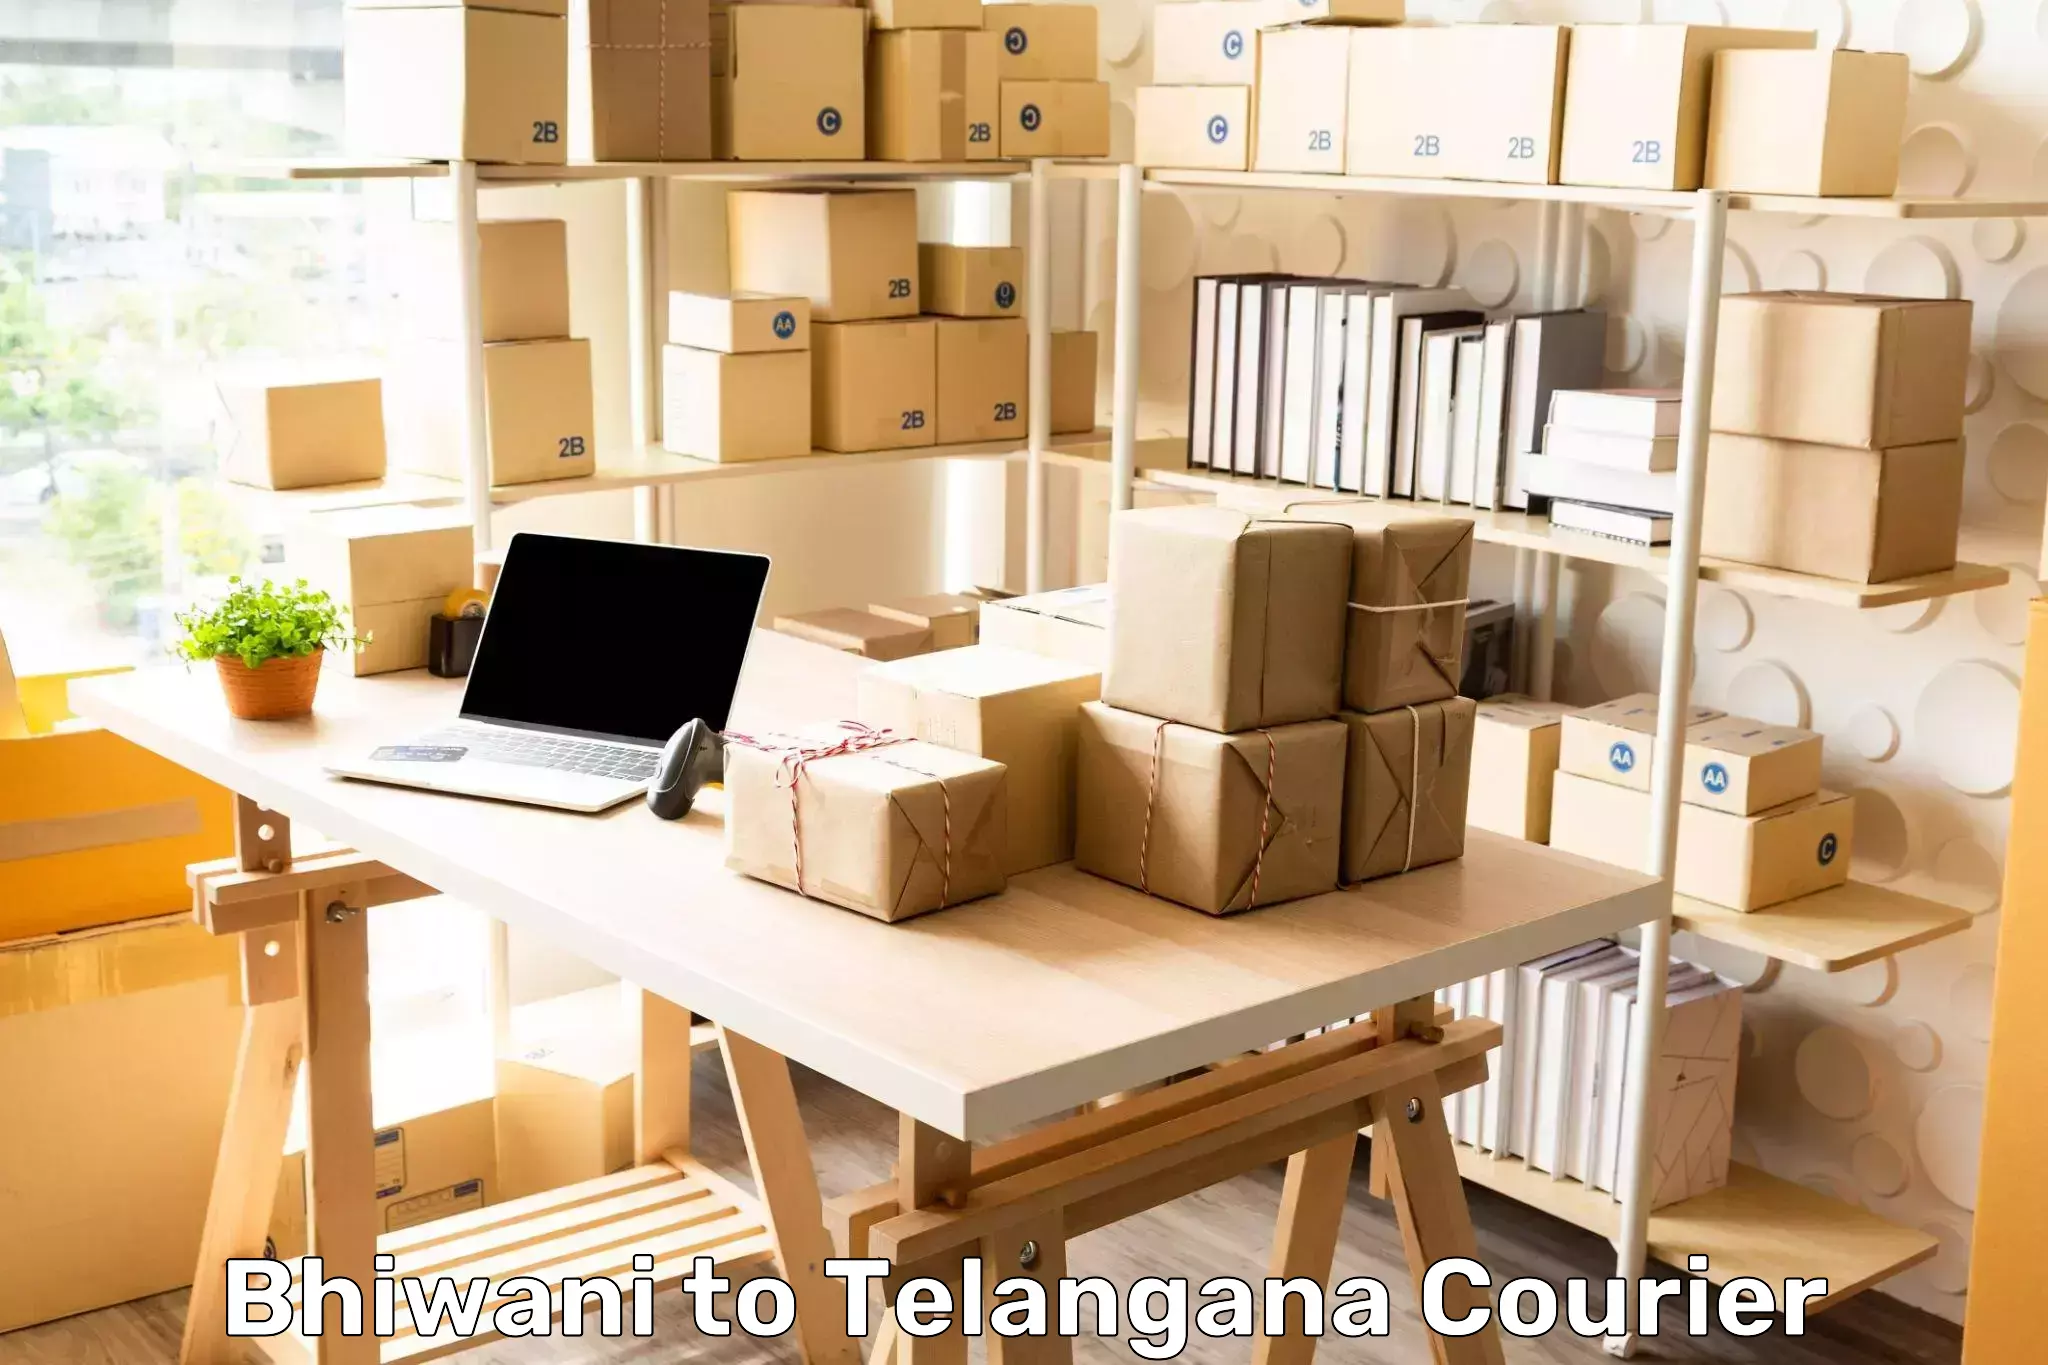 Cost-effective courier options Bhiwani to Sangareddy